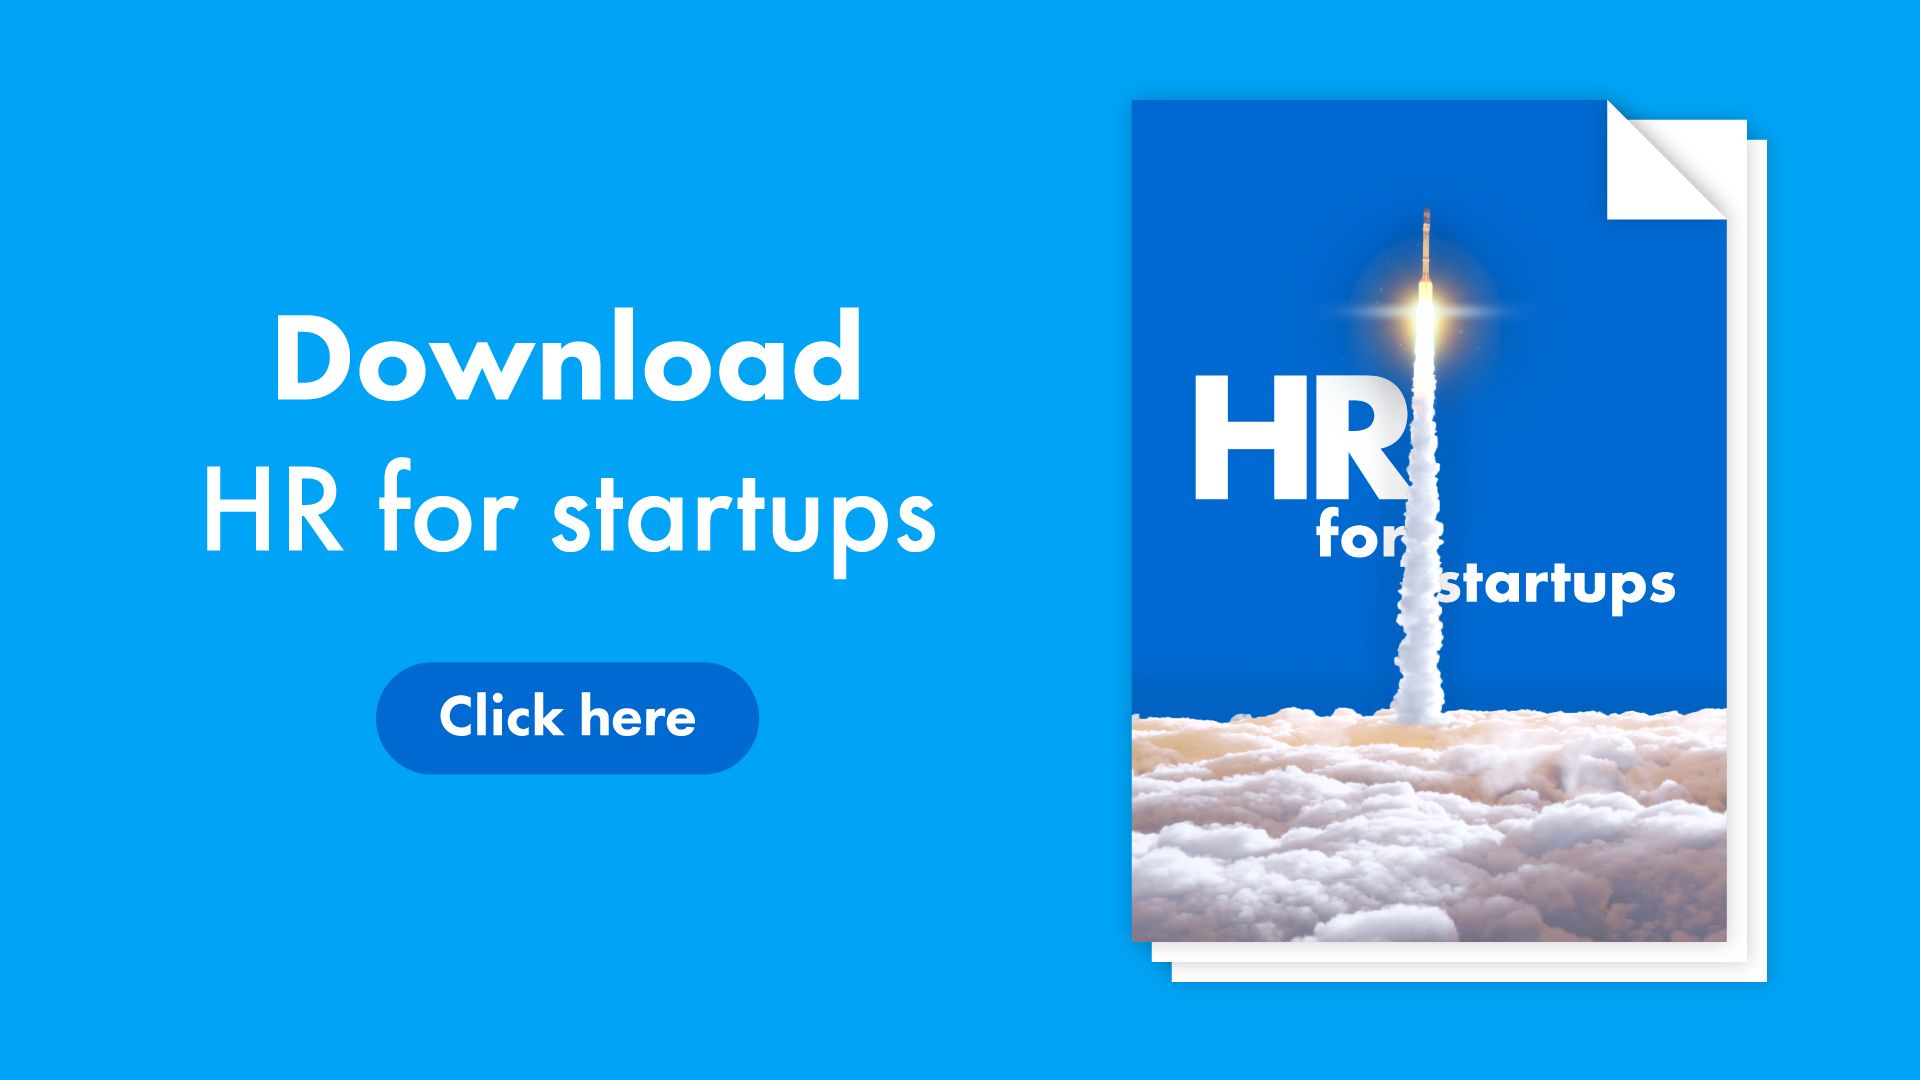 Click here to download our HR for startups guide